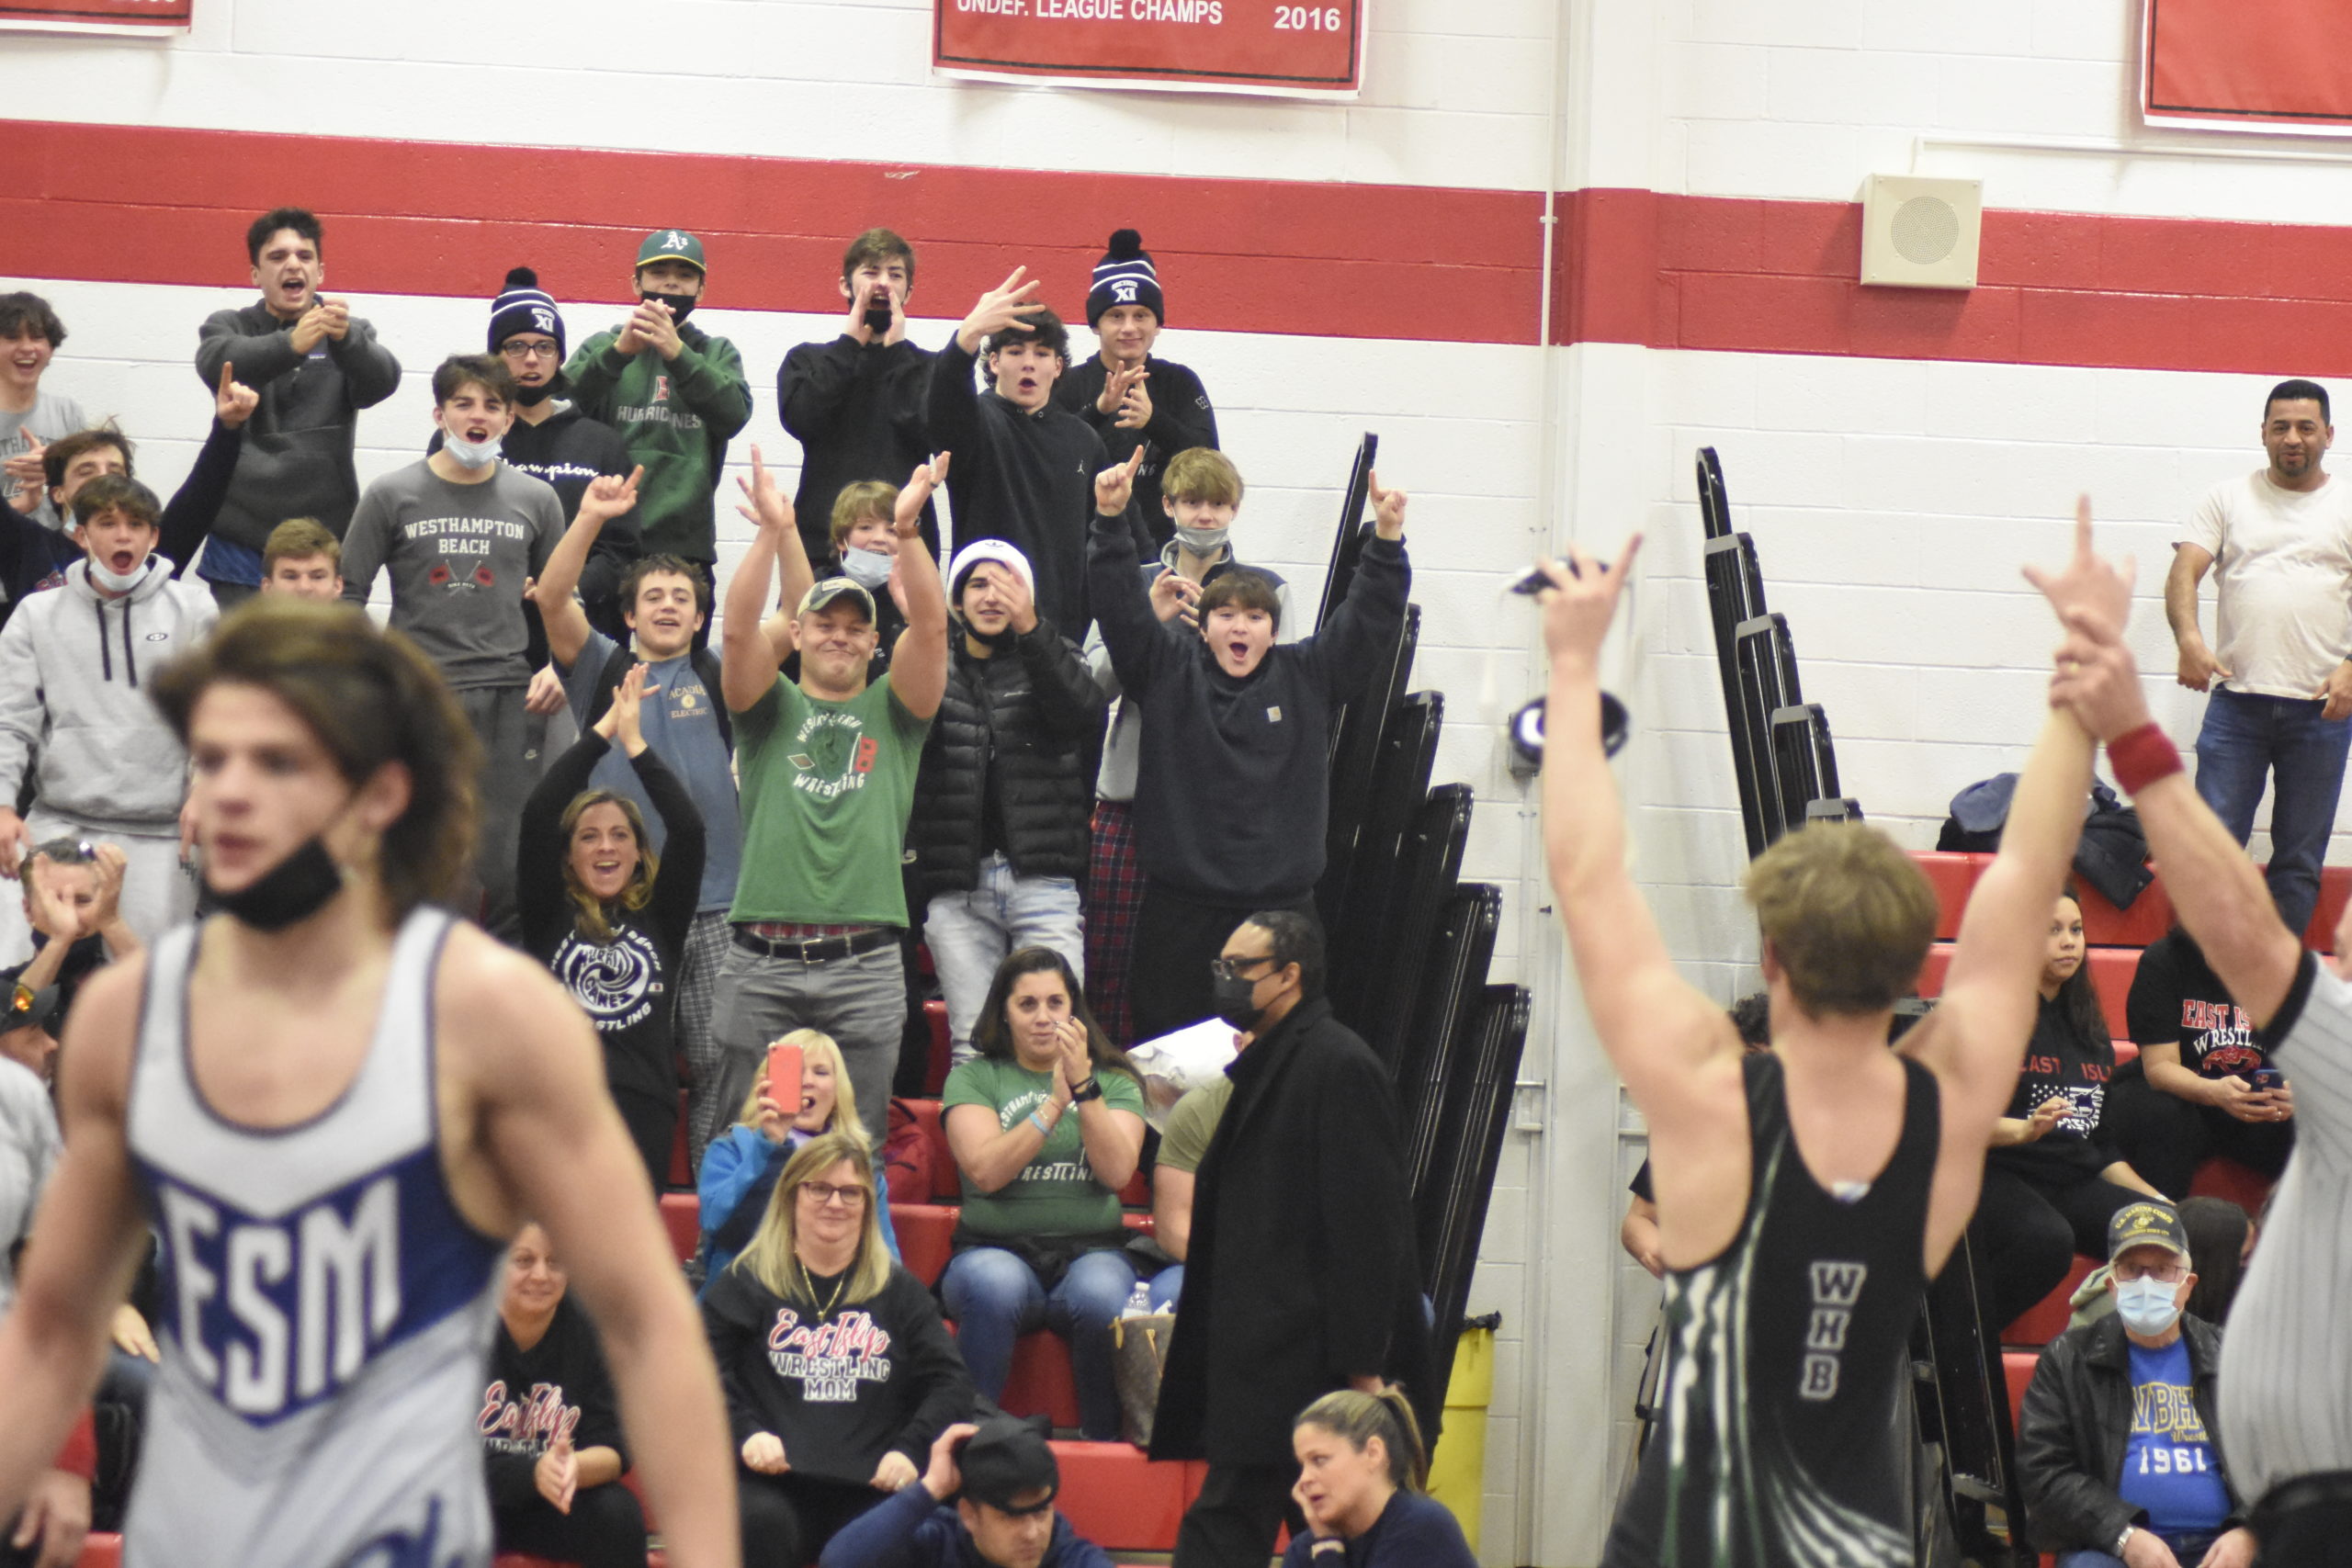 The Westhampton Beach crowd is pumped up after Dom Jurgel won the league title at 172 pounds.